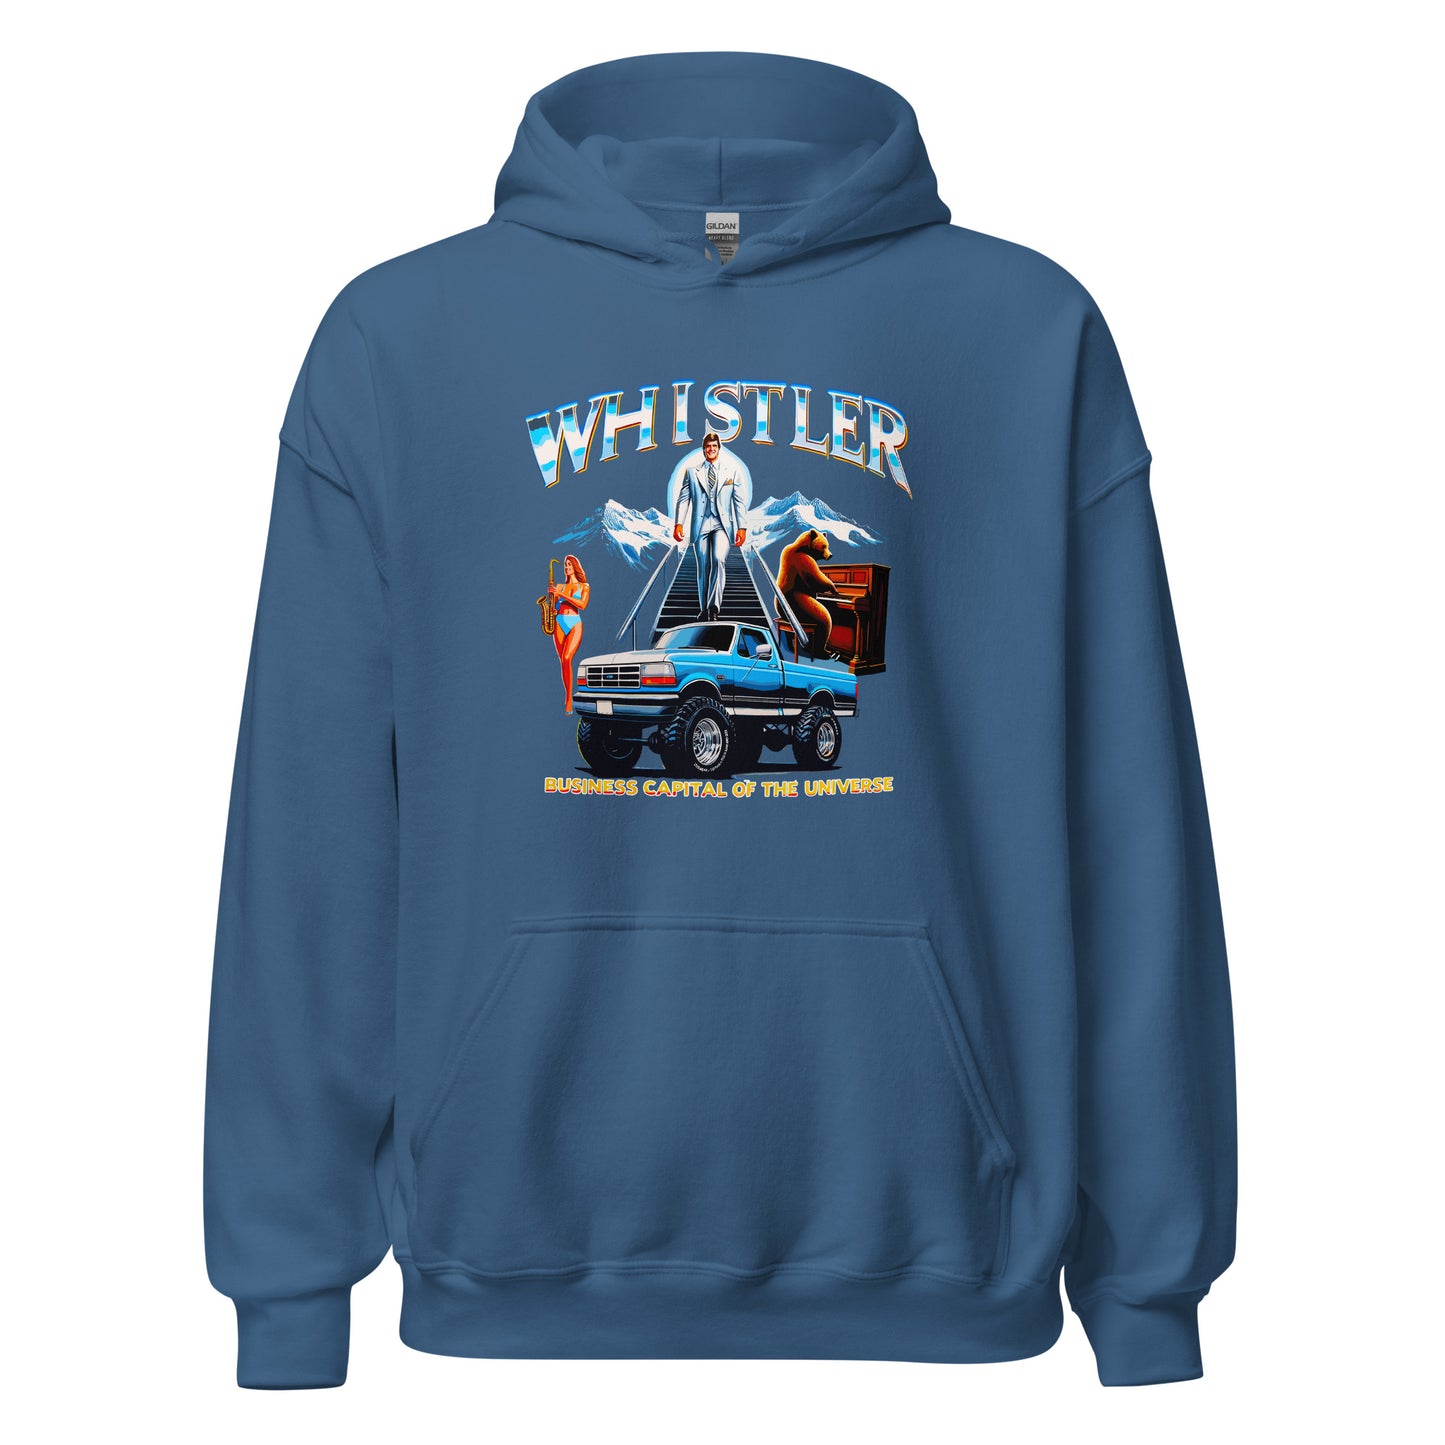 Whistler Business Capital of the Universe Hoodie printed by Whistler Shirts